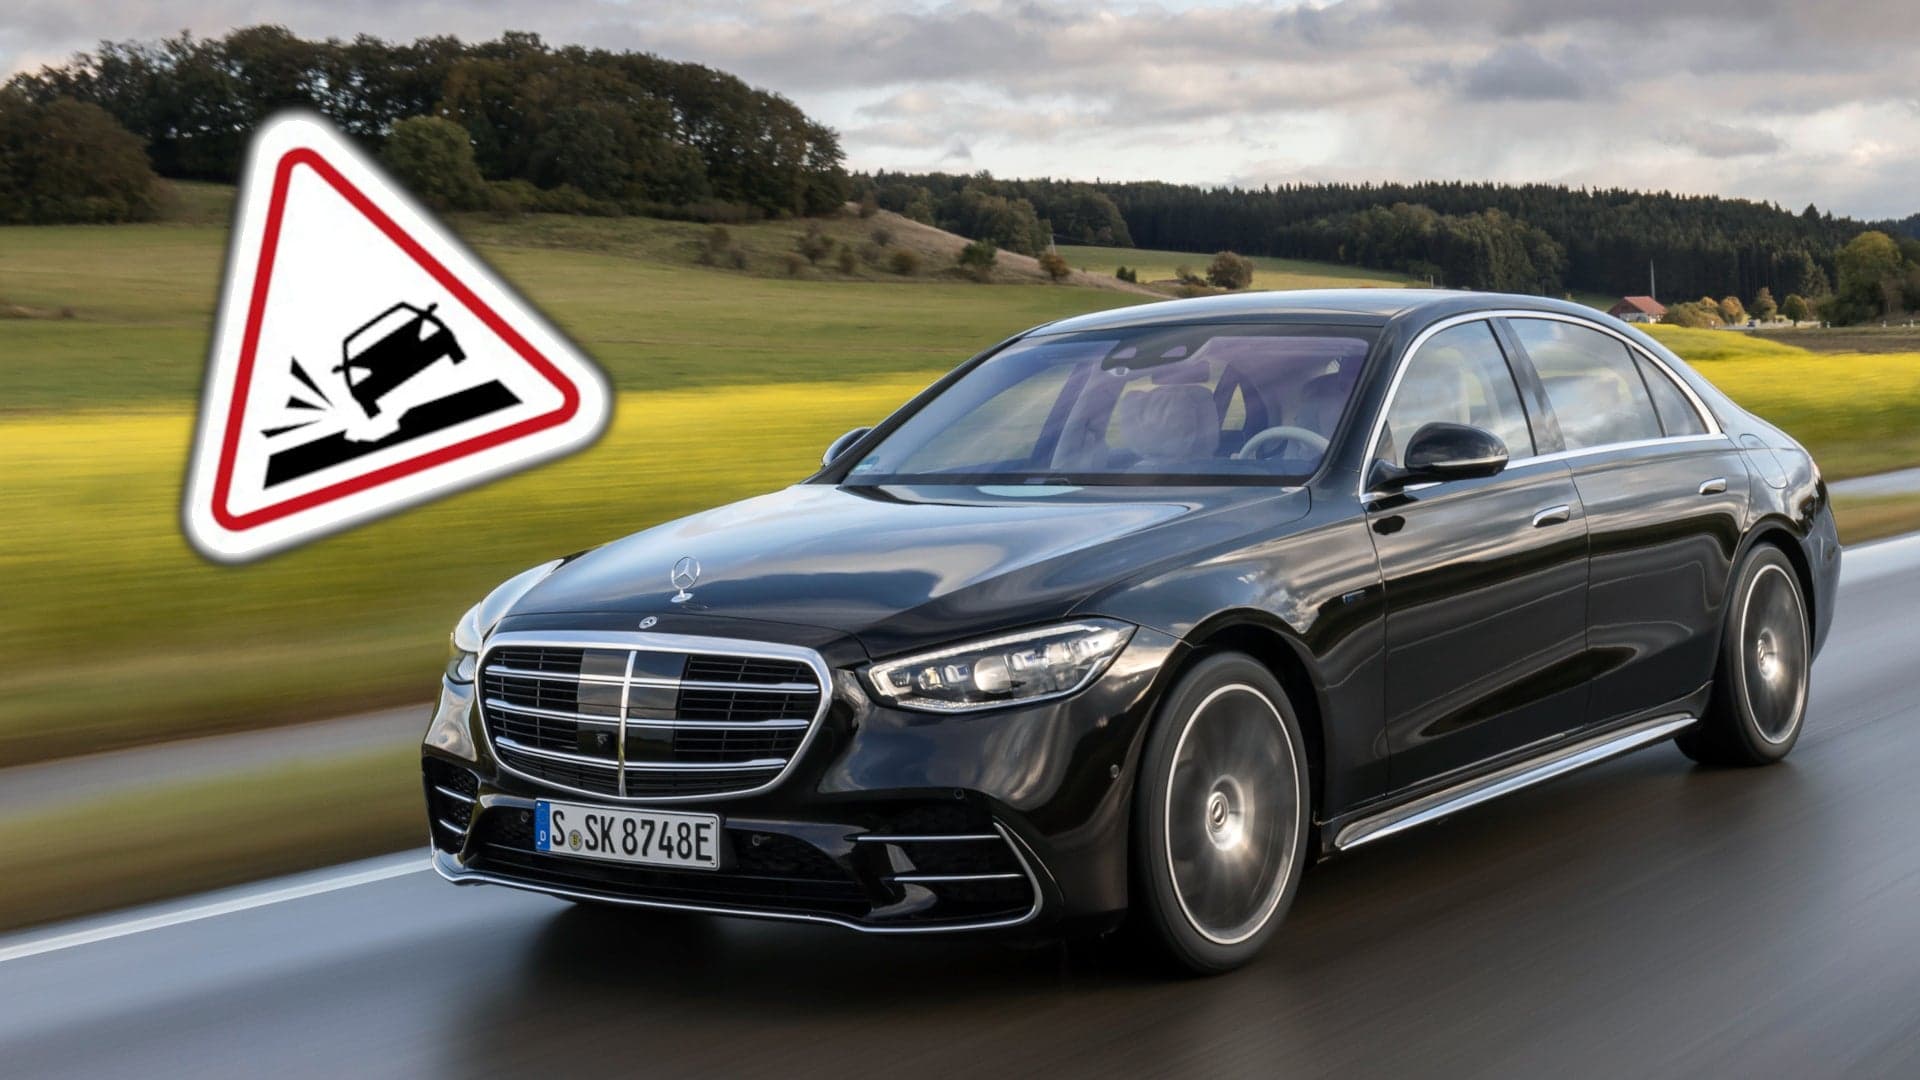 New Mercedes Cars Can Warn You About Potholes